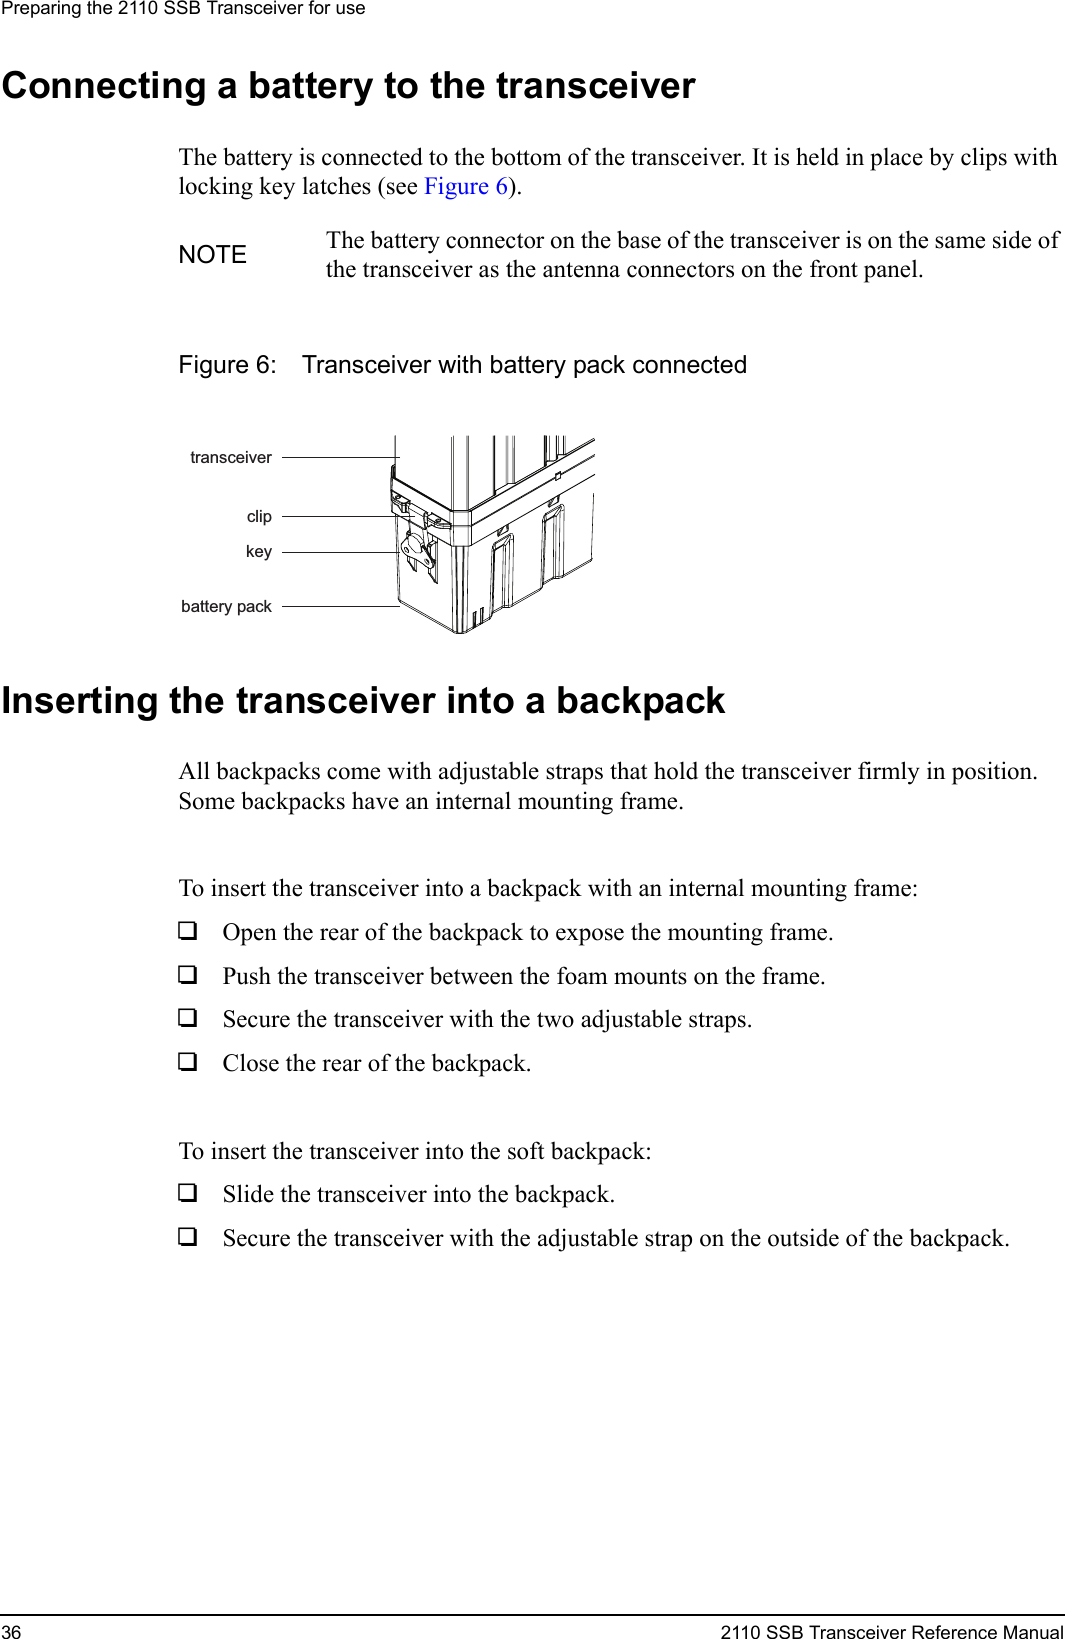 Preparing the 2110 SSB Transceiver for use36 2110 SSB Transceiver Reference ManualConnecting a battery to the transceiverThe battery is connected to the bottom of the transceiver. It is held in place by clips with locking key latches (see Figure 6).Figure 6: Transceiver with battery pack connectedInserting the transceiver into a backpackAll backpacks come with adjustable straps that hold the transceiver firmly in position. Some backpacks have an internal mounting frame.To insert the transceiver into a backpack with an internal mounting frame:1Open the rear of the backpack to expose the mounting frame.1Push the transceiver between the foam mounts on the frame.1Secure the transceiver with the two adjustable straps.1Close the rear of the backpack.To insert the transceiver into the soft backpack:1Slide the transceiver into the backpack.1Secure the transceiver with the adjustable strap on the outside of the backpack.NOTE The battery connector on the base of the transceiver is on the same side of the transceiver as the antenna connectors on the front panel.keycliptransceiverbattery pack